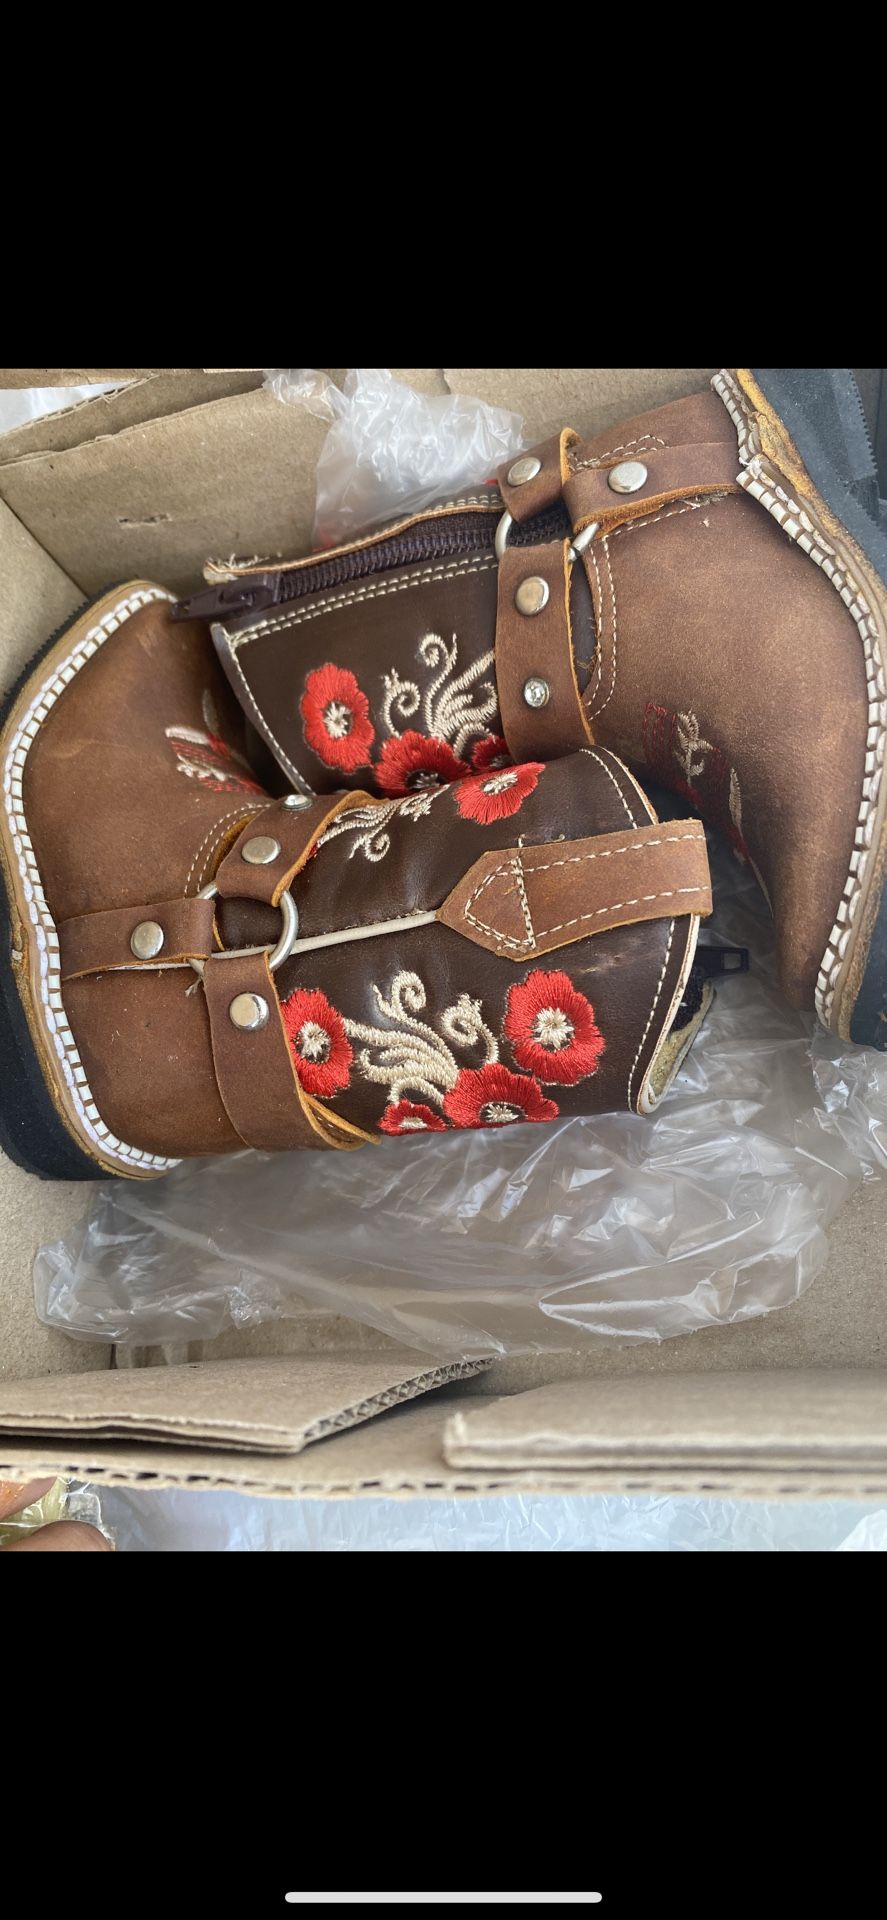 Toddler Cowgirl Boots